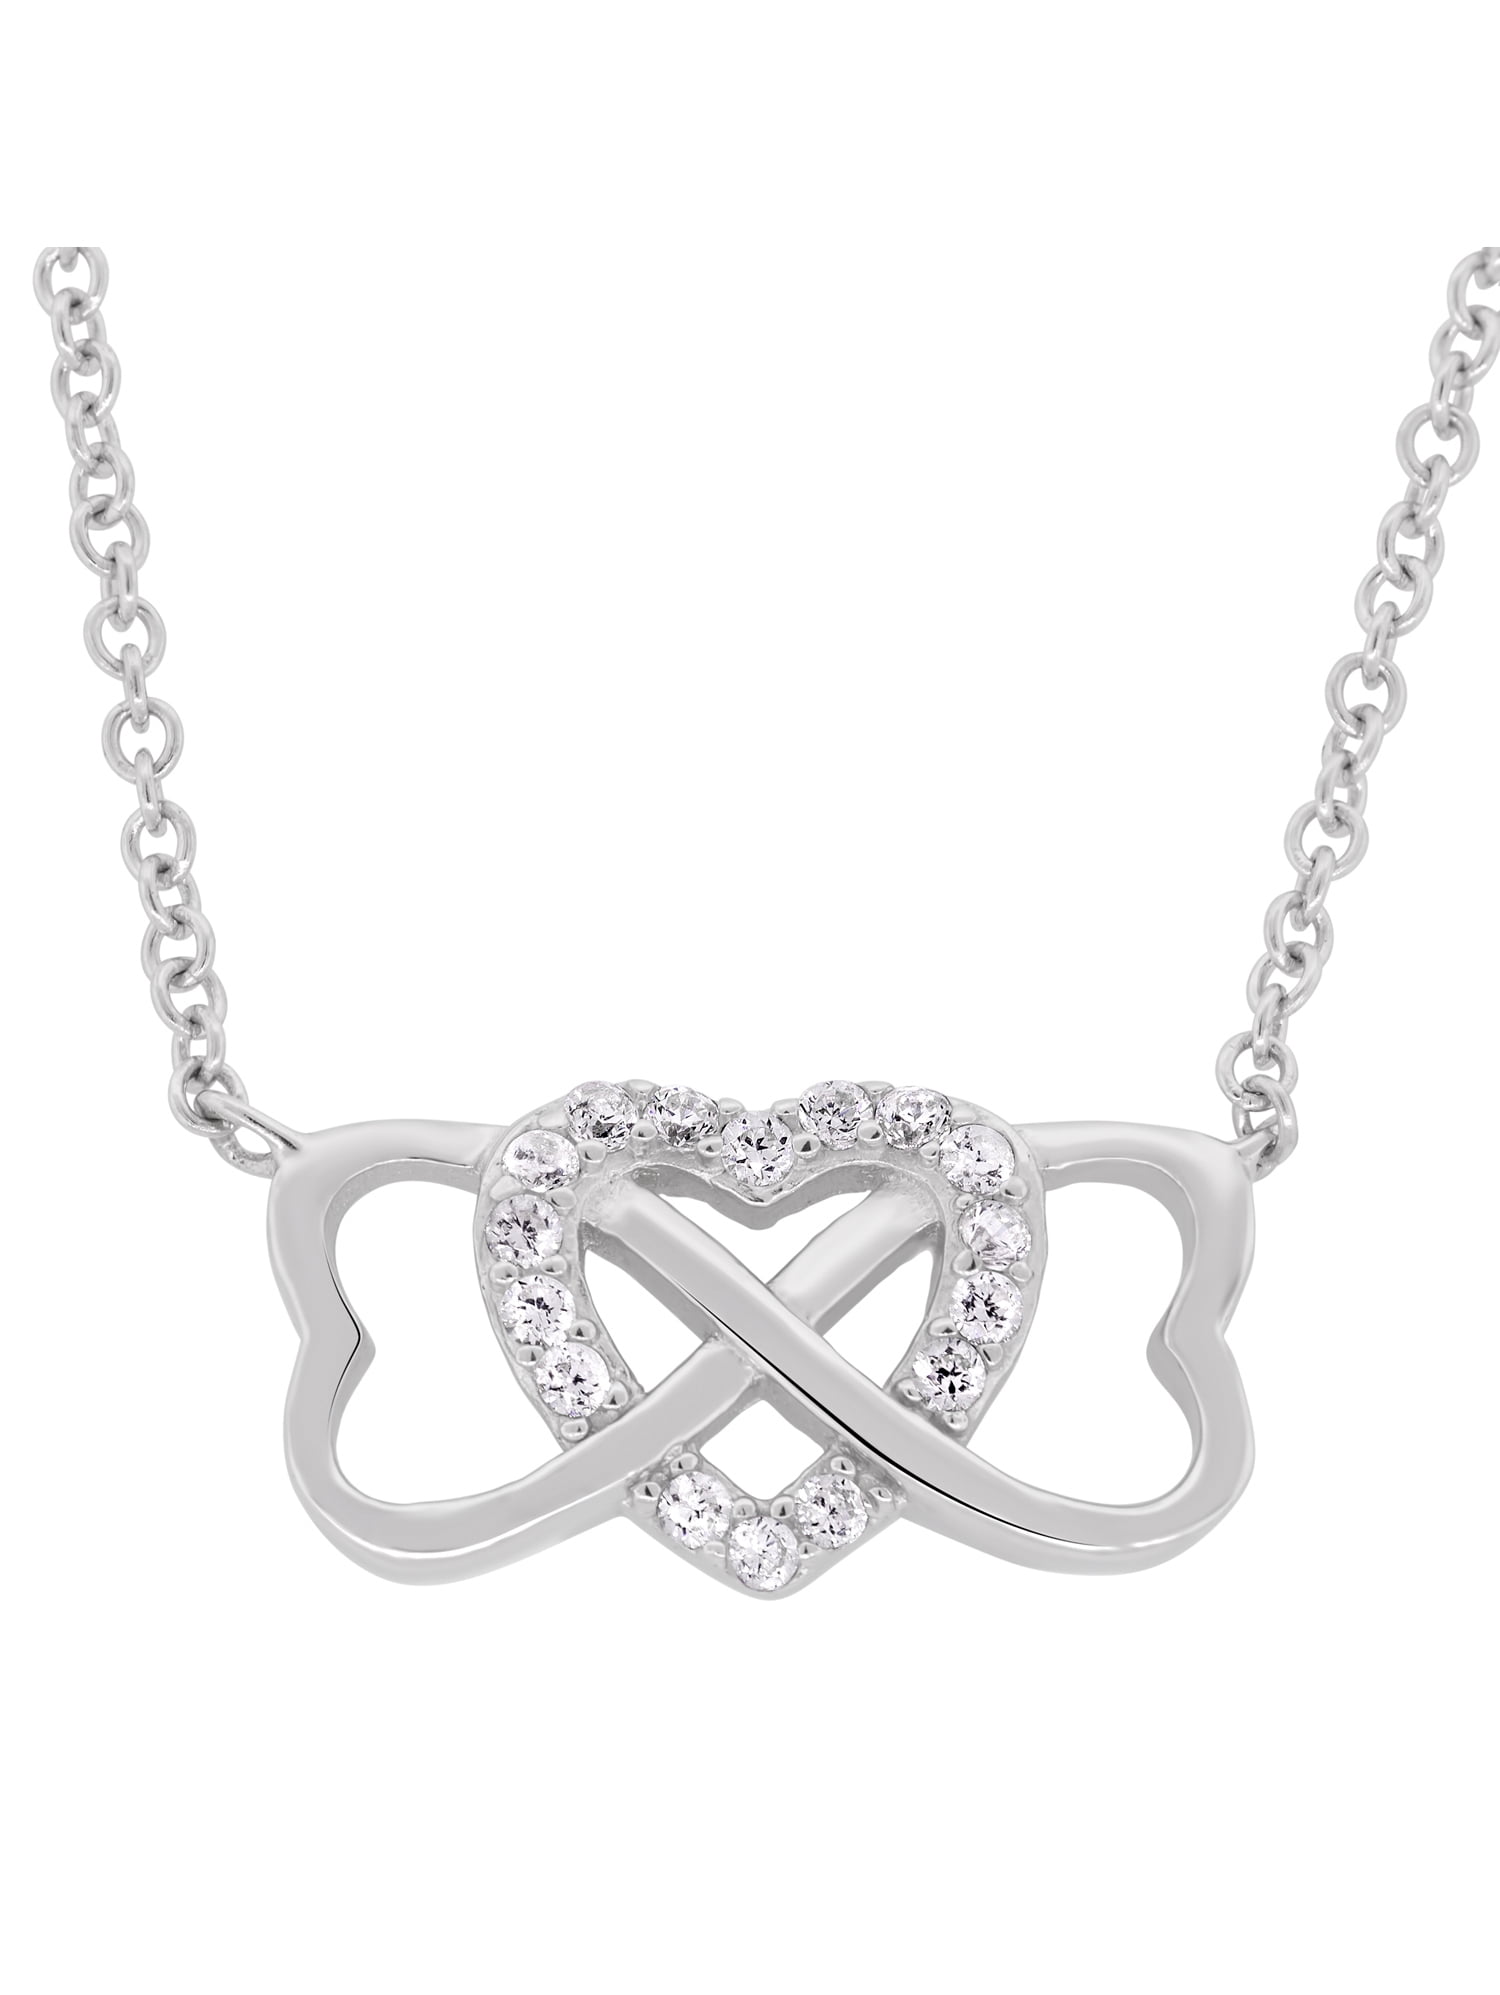 Triple-Heart CZ Charm Pendant & Chain Necklace in 925 Sterling Silver w/ Rhodium 